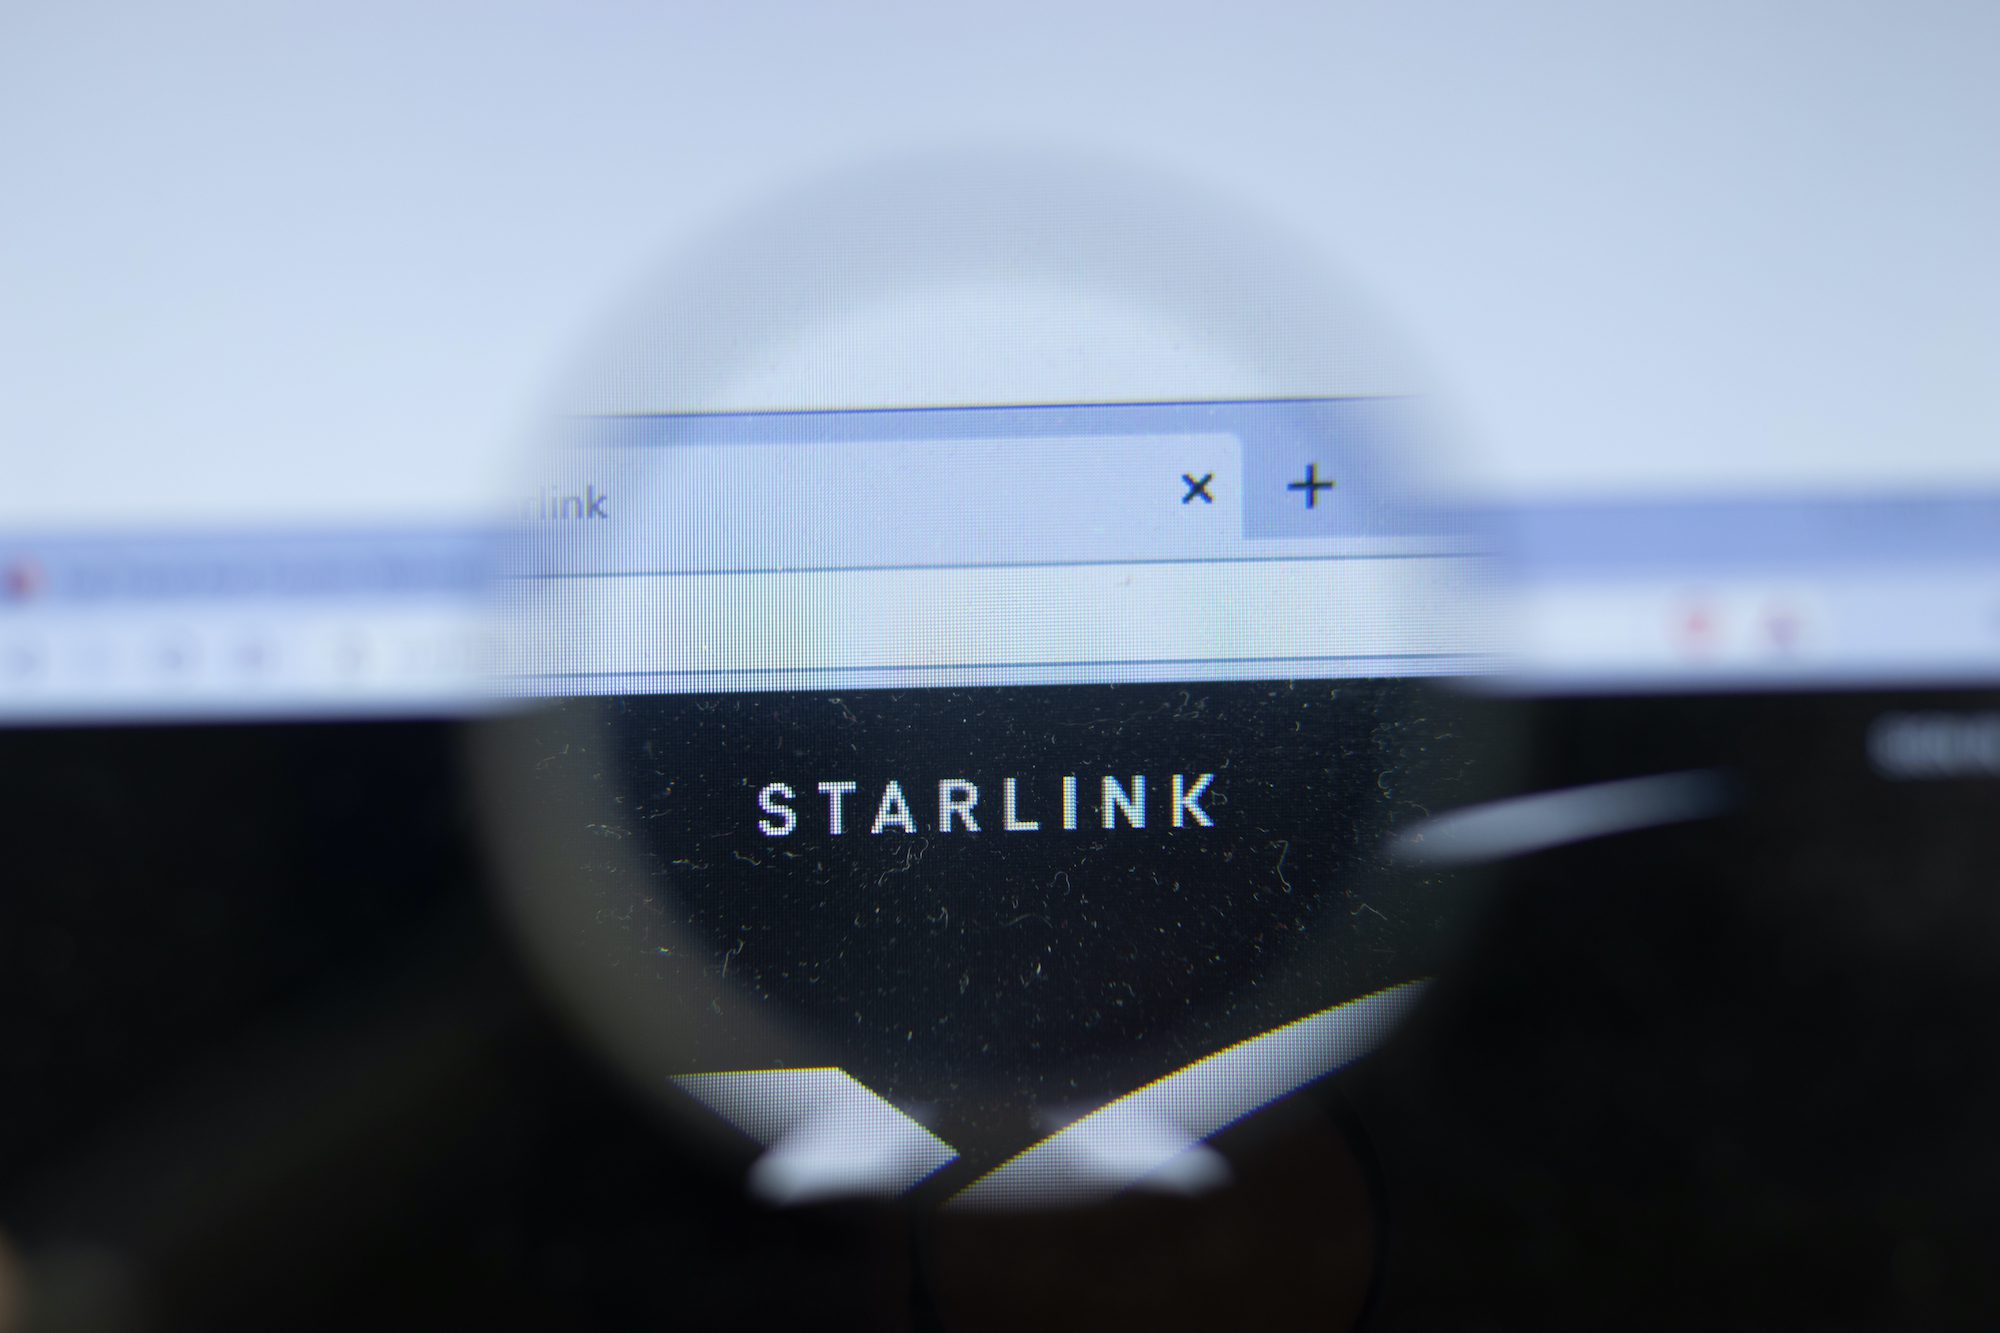 Starlink logo on a computer